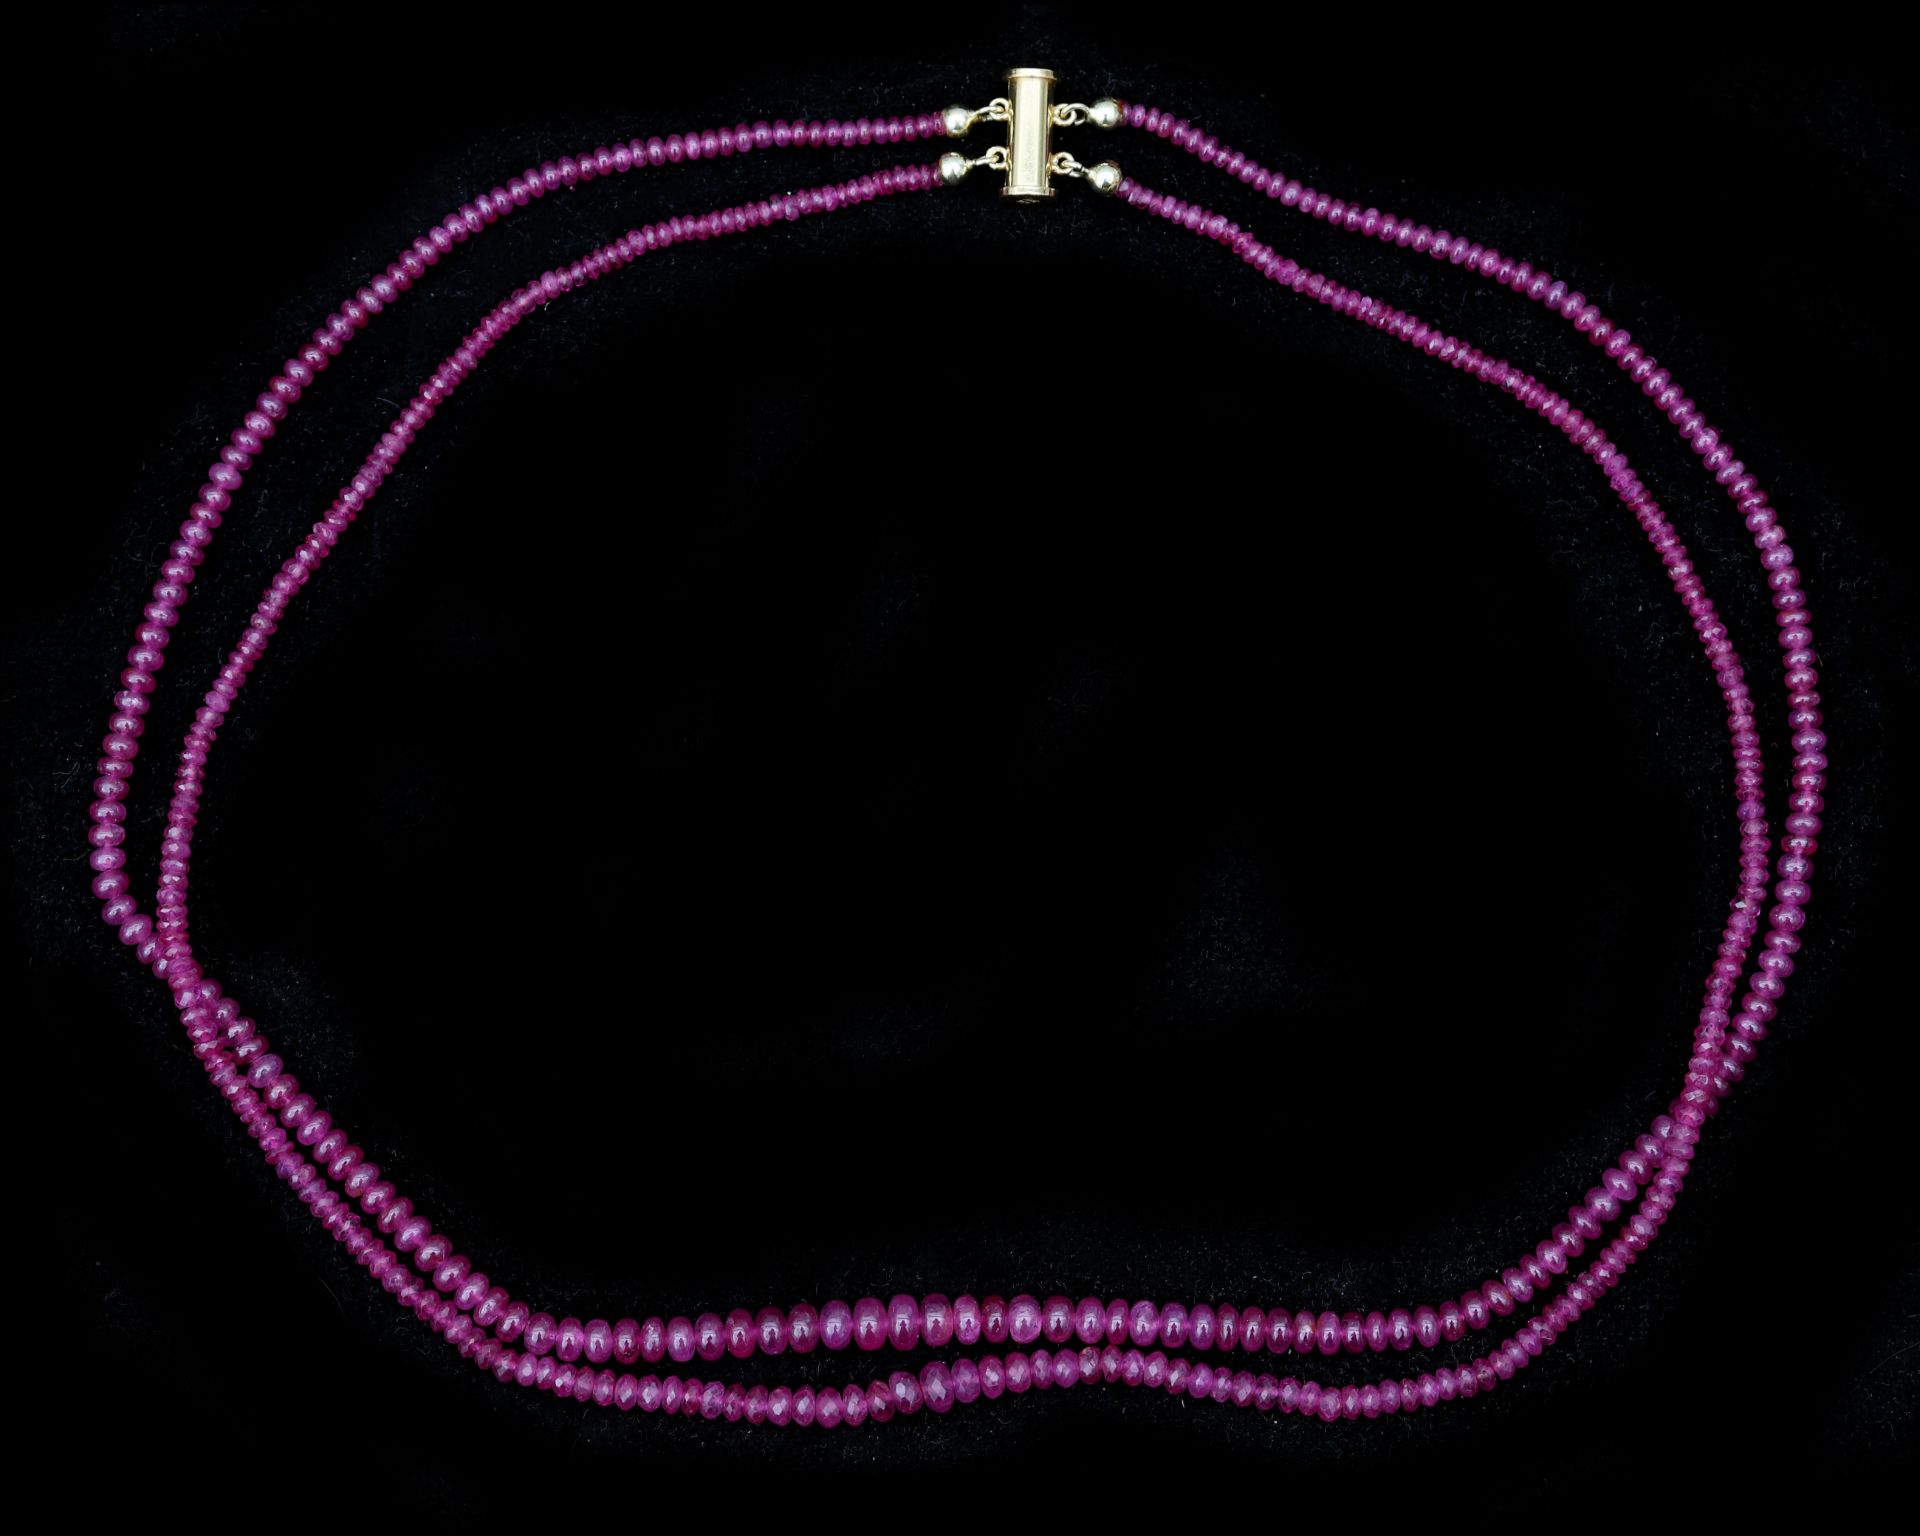 A double strung string of rubies on 18 karat gold magnetic lock